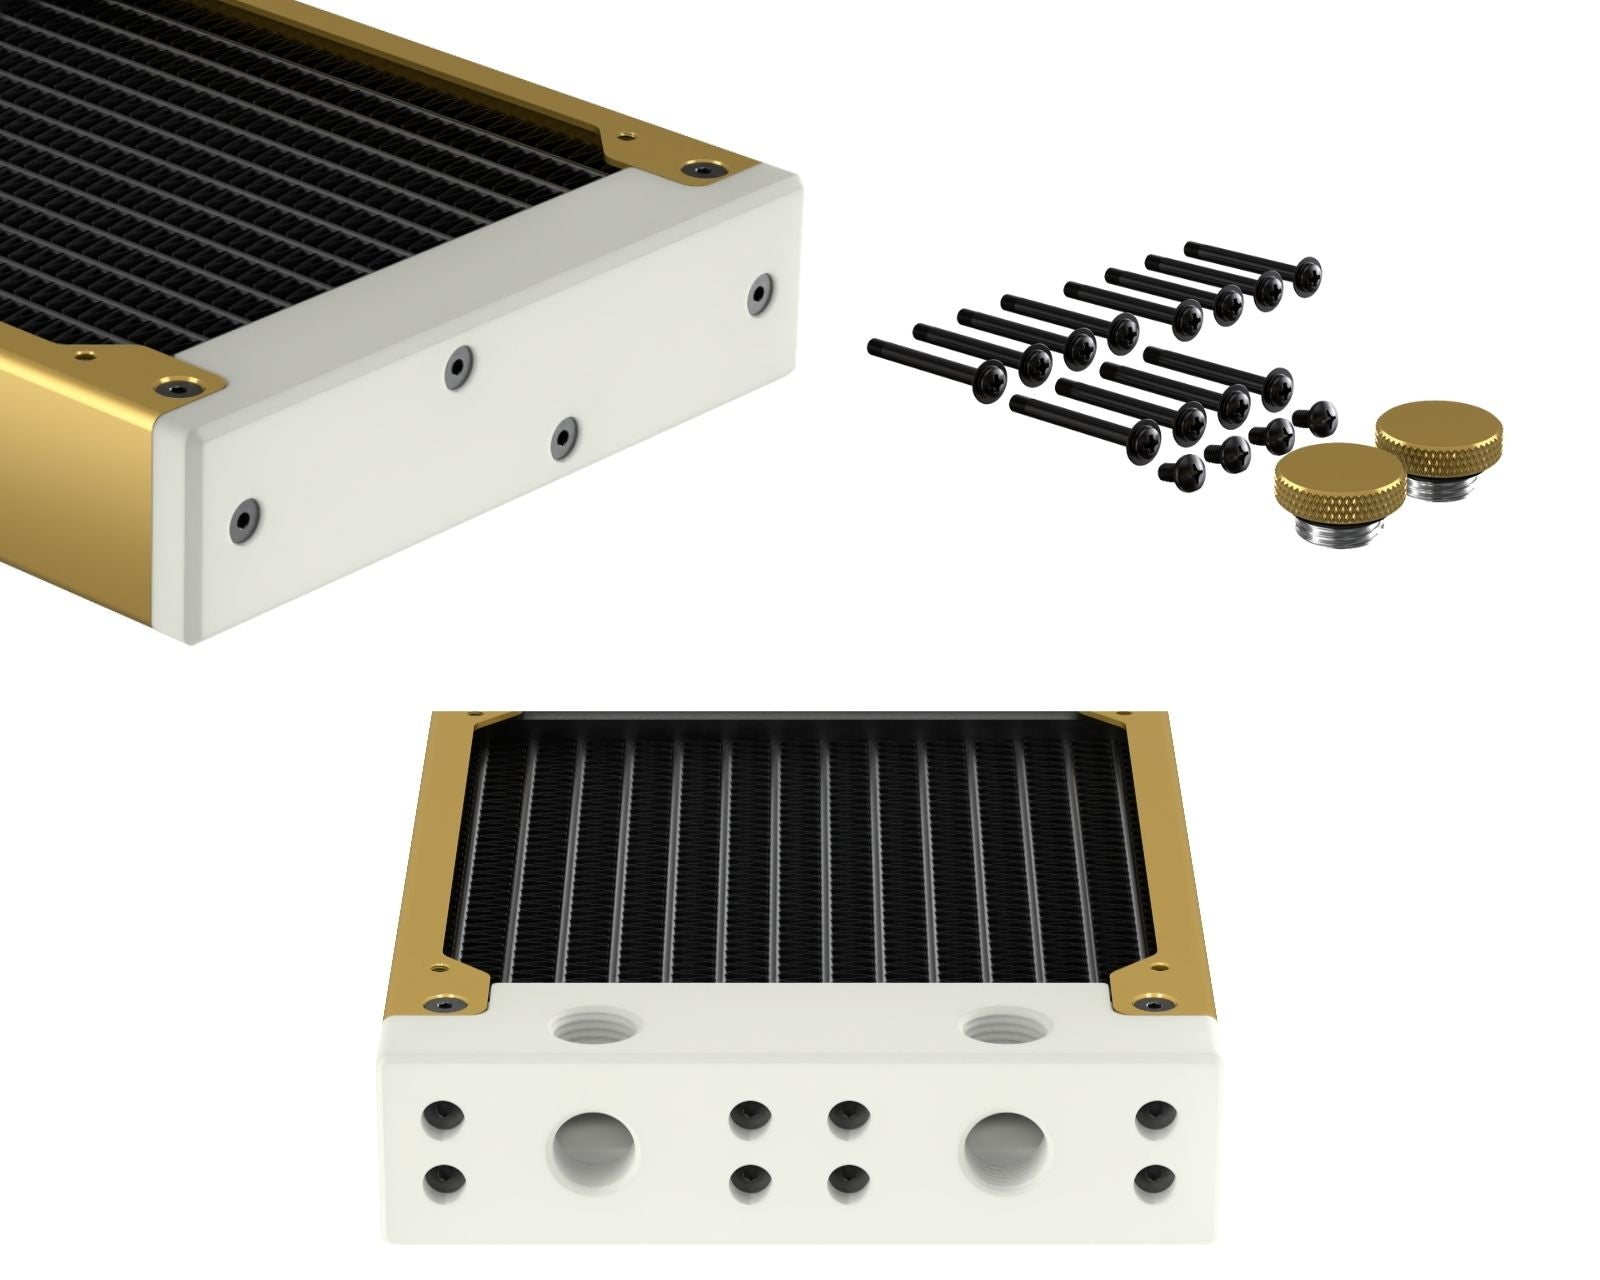 PrimoChill 360SL (30mm) EXIMO Modular Radiator, White POM, 3x120mm, Triple Fan (R-SL-W36) Available in 20+ Colors, Assembled in USA and Custom Watercooling Loop Ready - Candy Gold